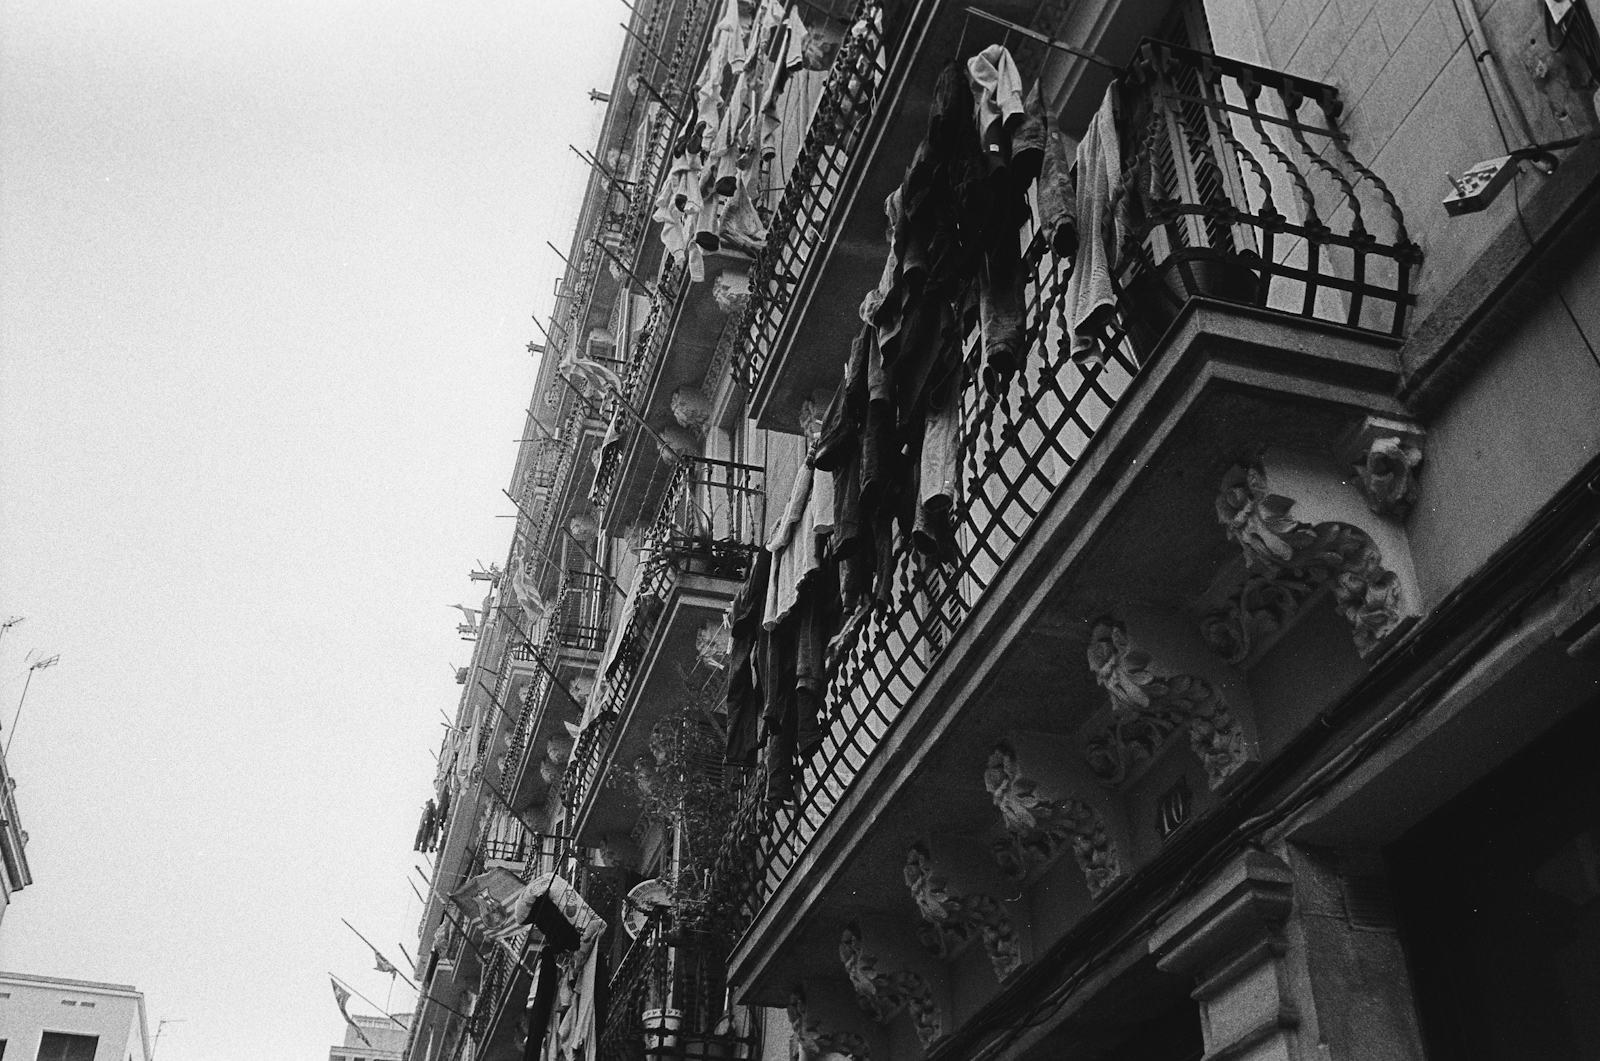 2022-02
8994
hp5
vision43
barcelona
mp
summicron50
places